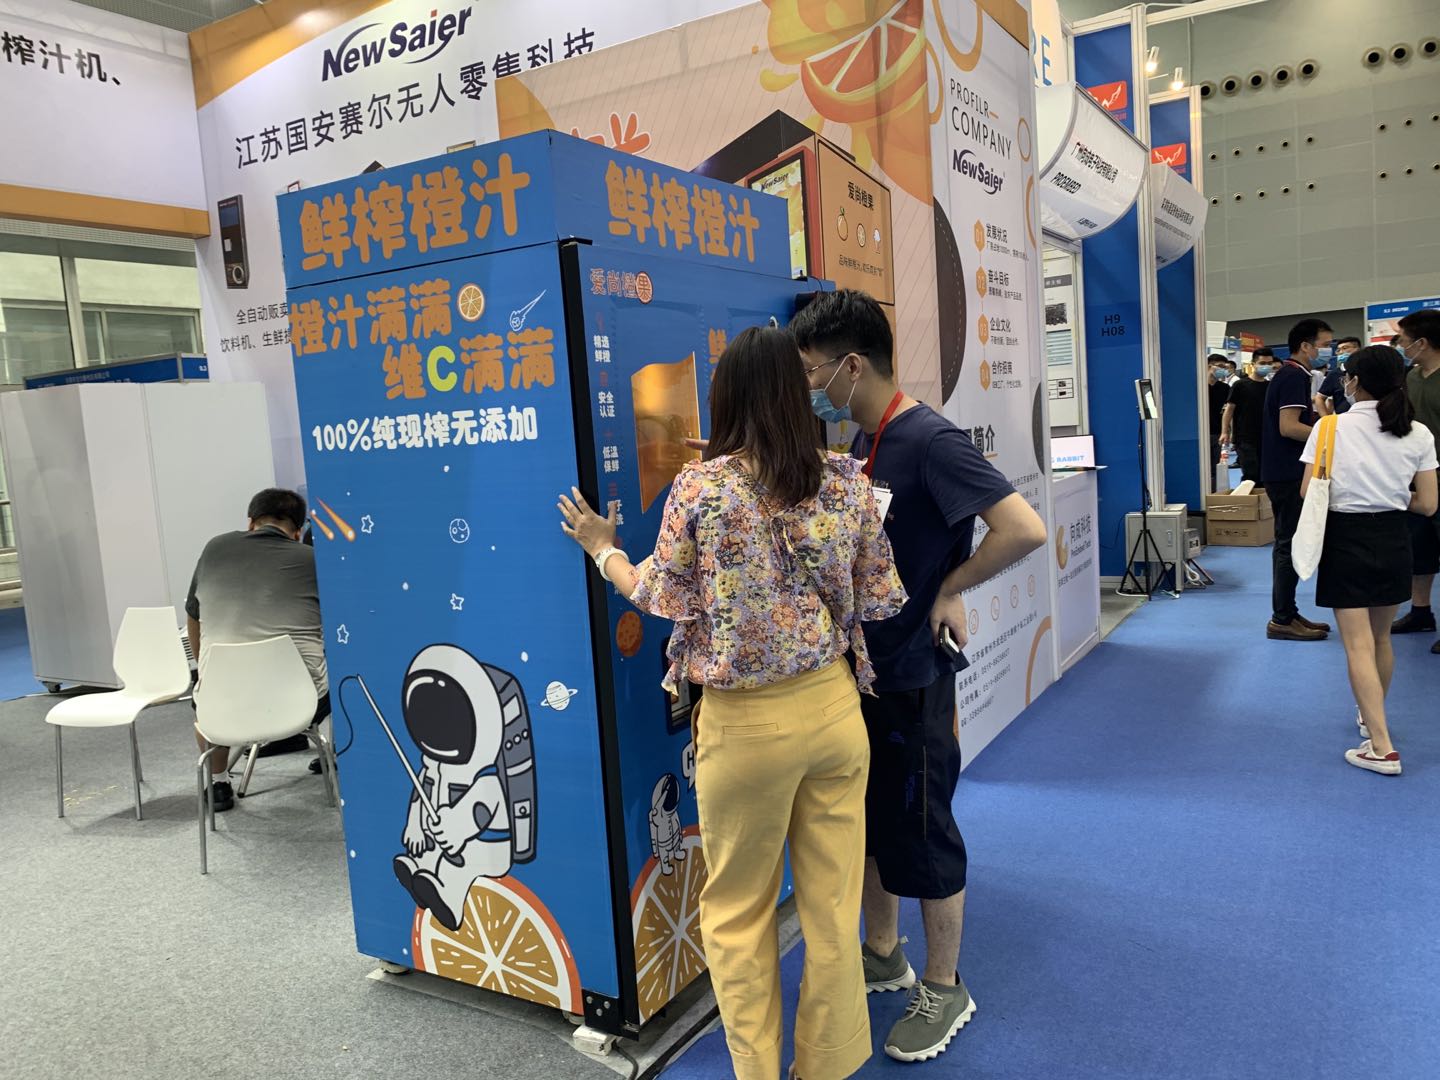 Newsaier in Guangzhou International Business Intelligence Equipment Industry Expo